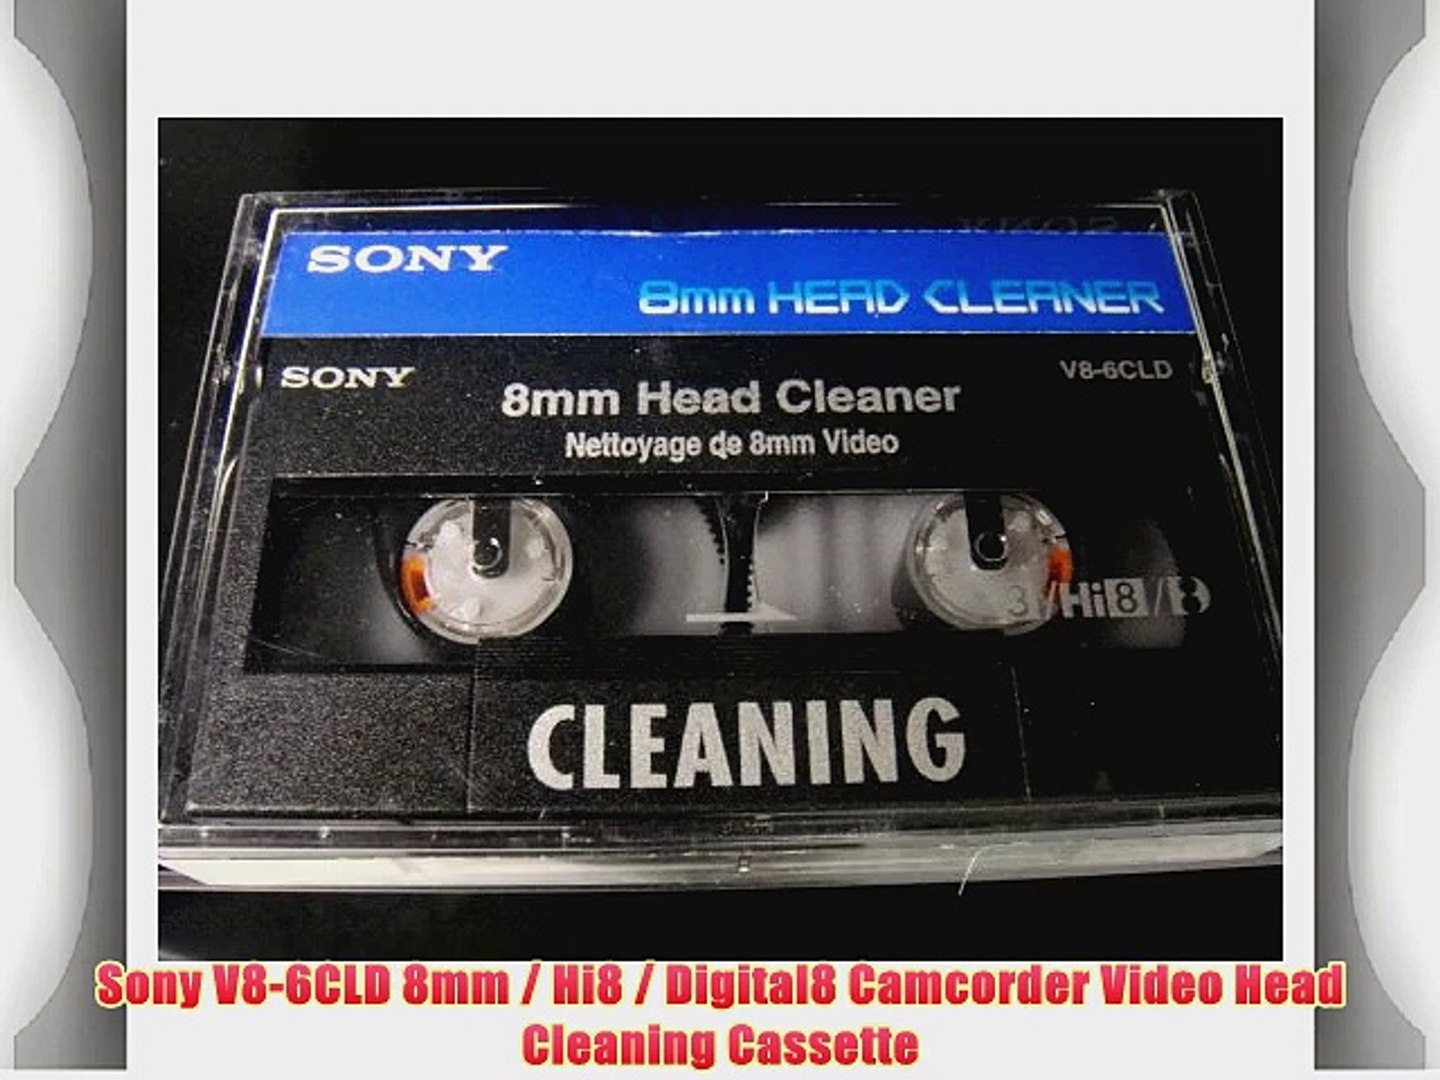 Sony V8-6CLD 8mm / Hi8 / Digital8 Camcorder Video Head Cleaning Cassette -  video Dailymotion